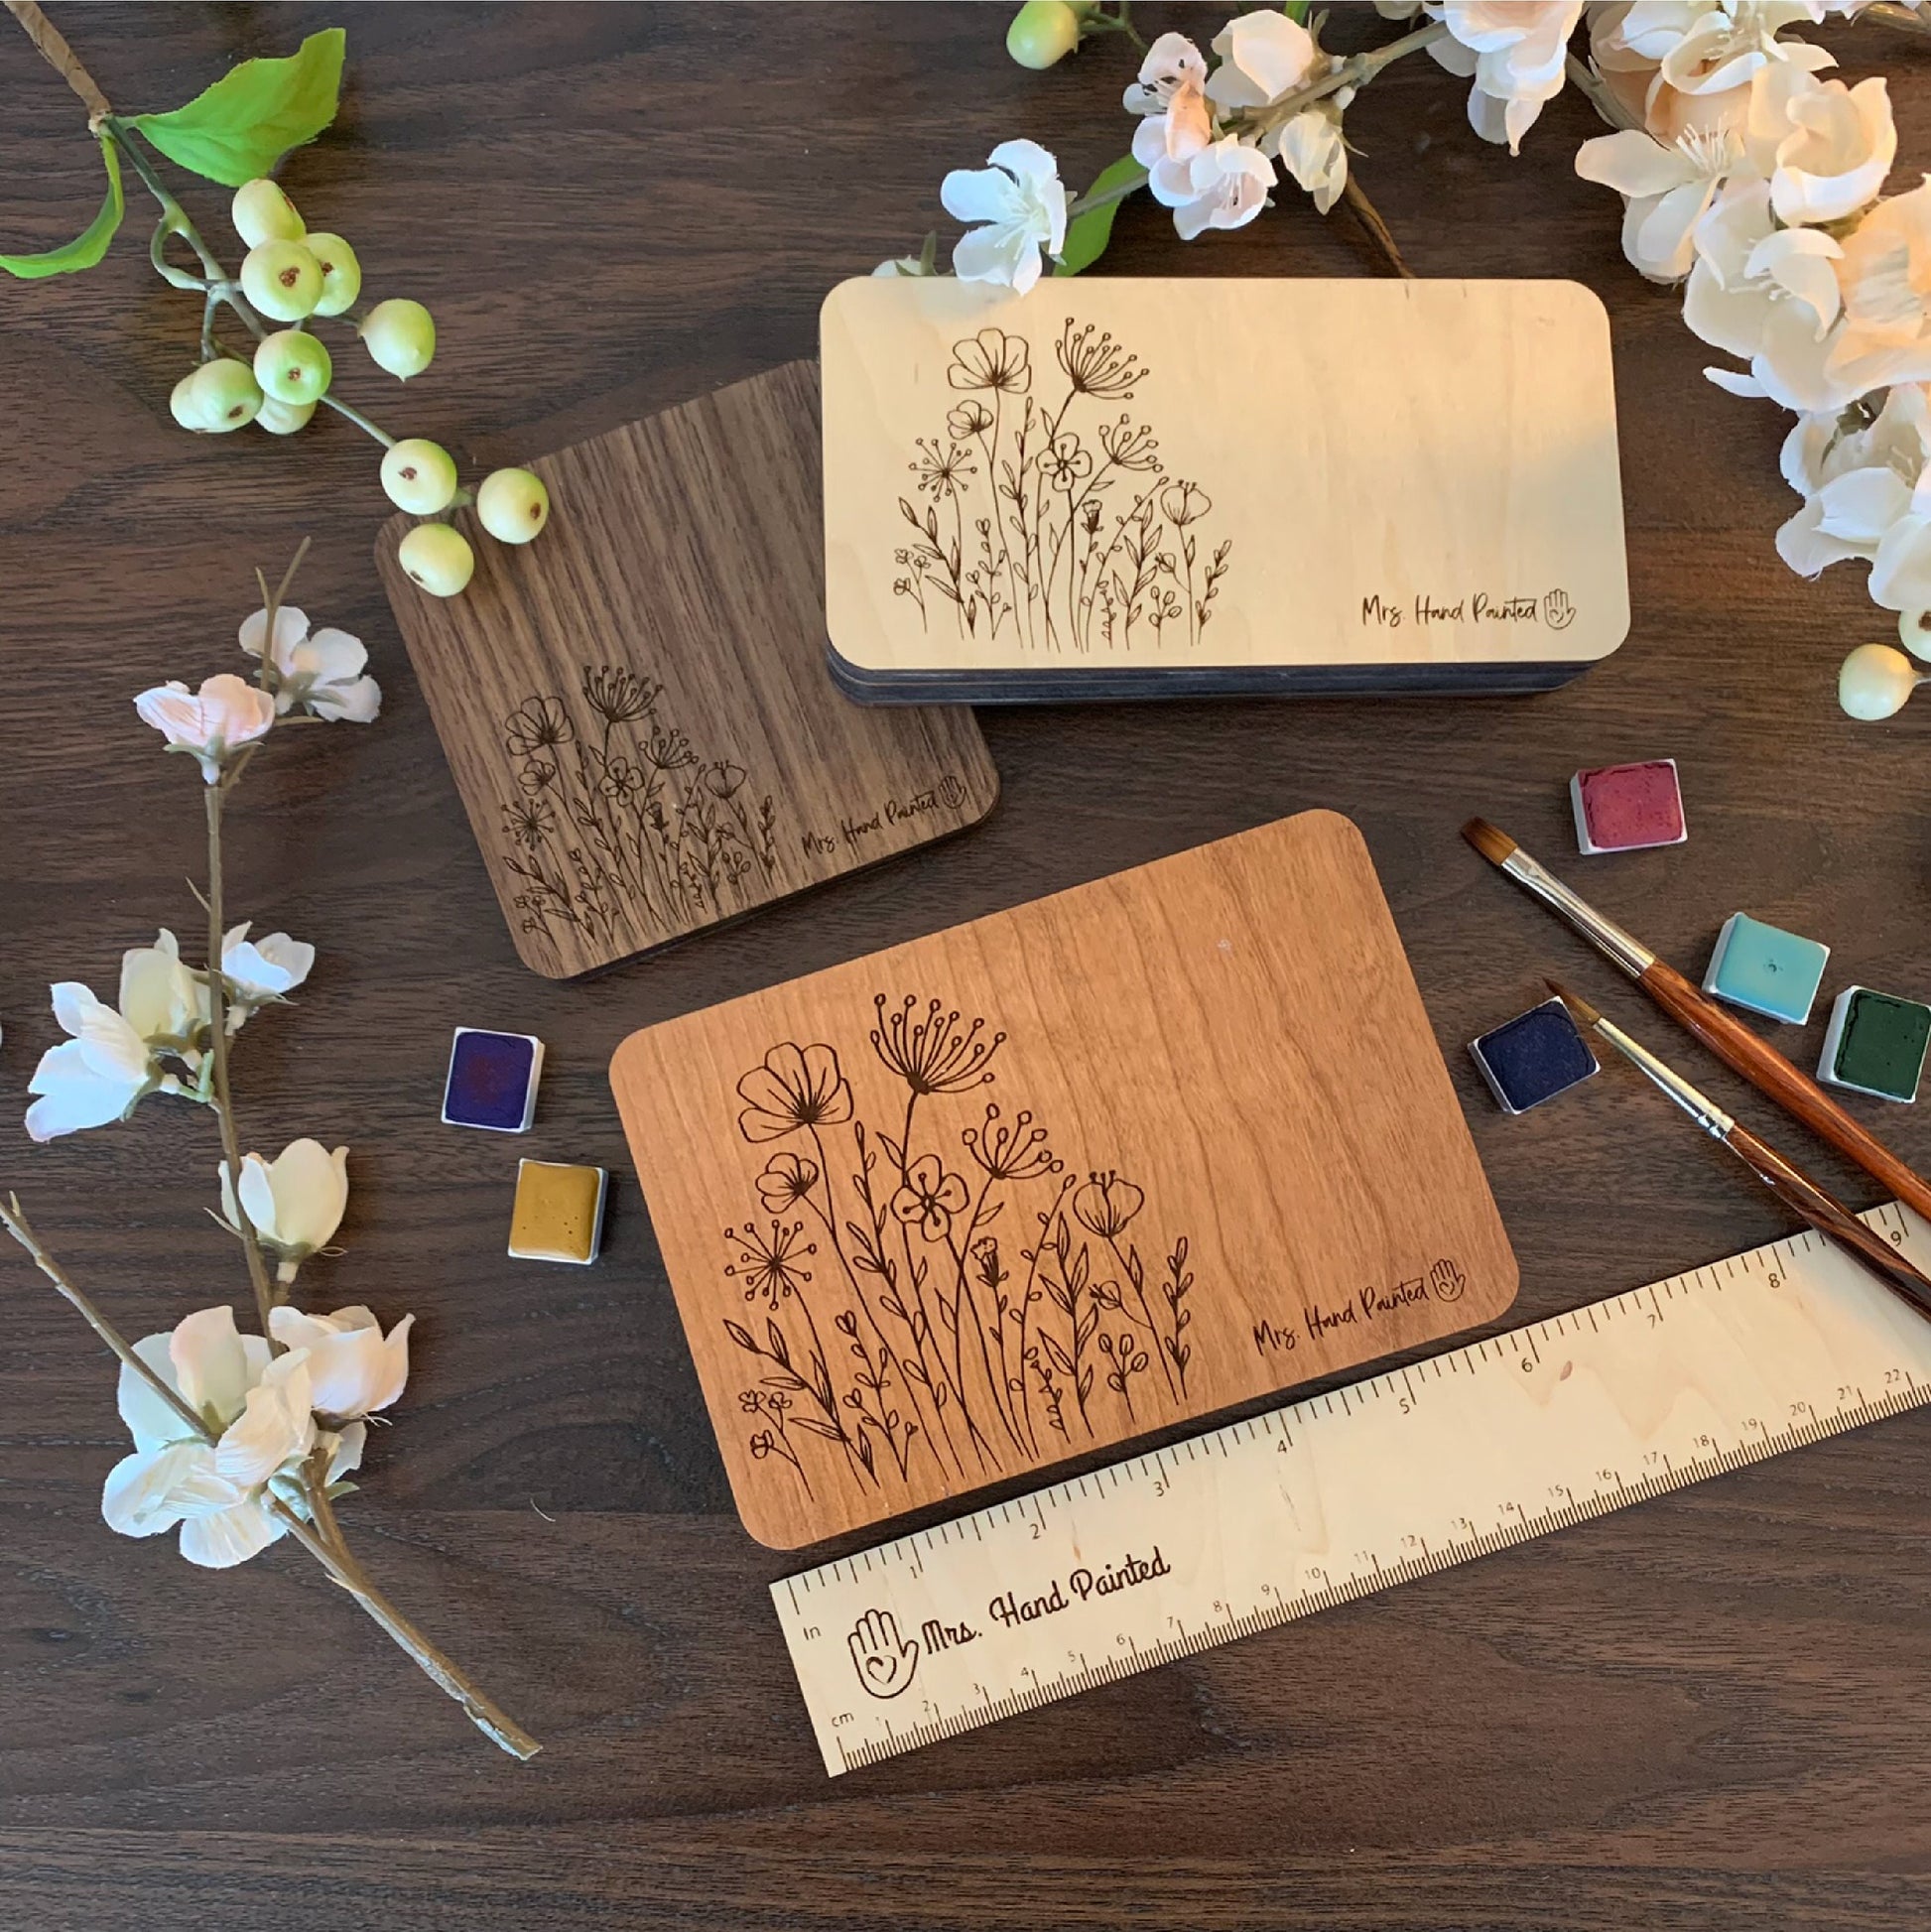 Custom Engraved Wood Watercolor Box with Hand Drawn Floral Doodle Design and Personalization